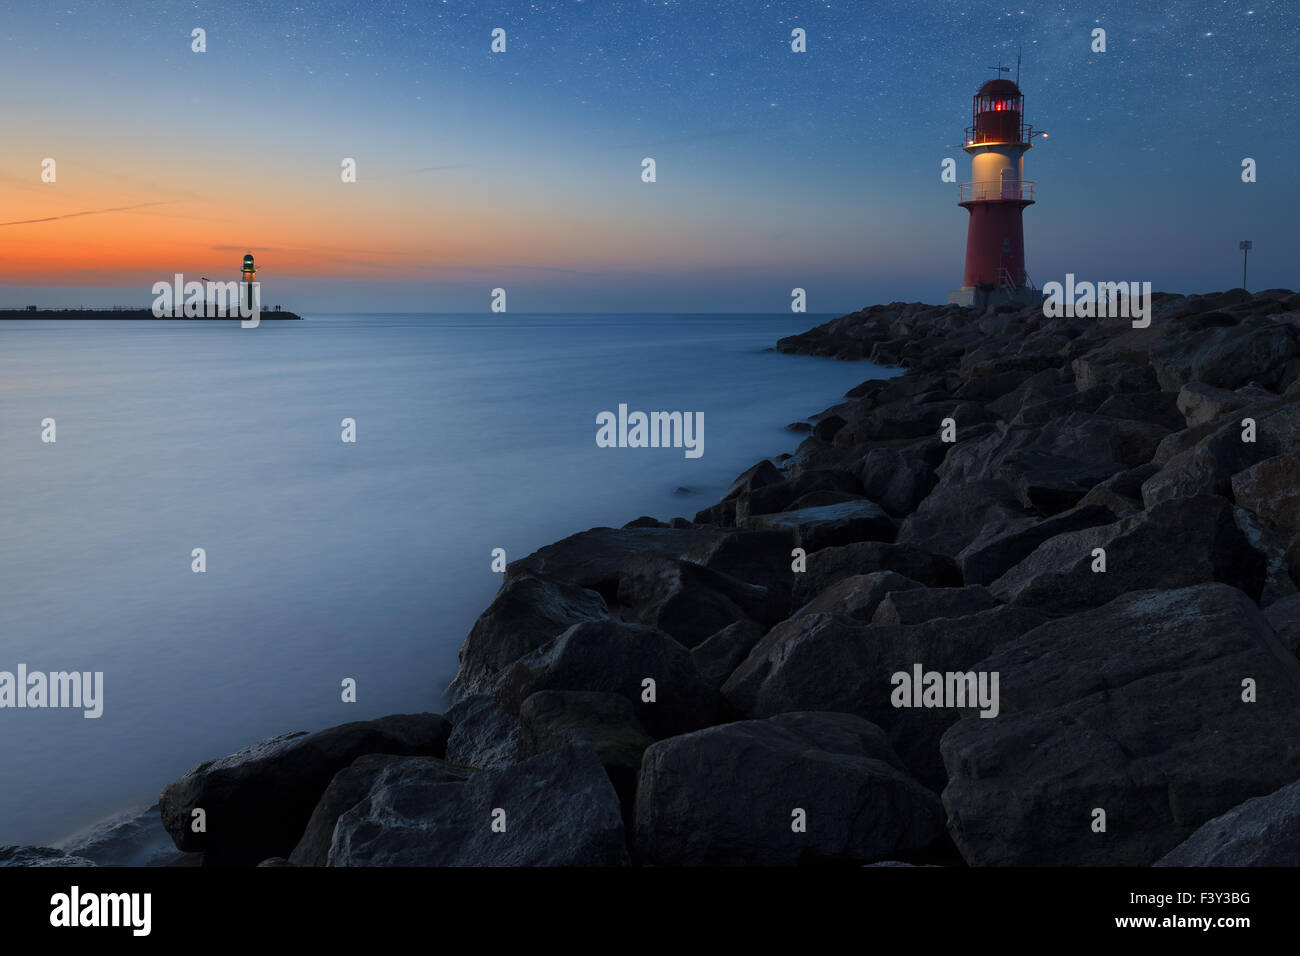 Starry sky over the baltic sea Stock Photo